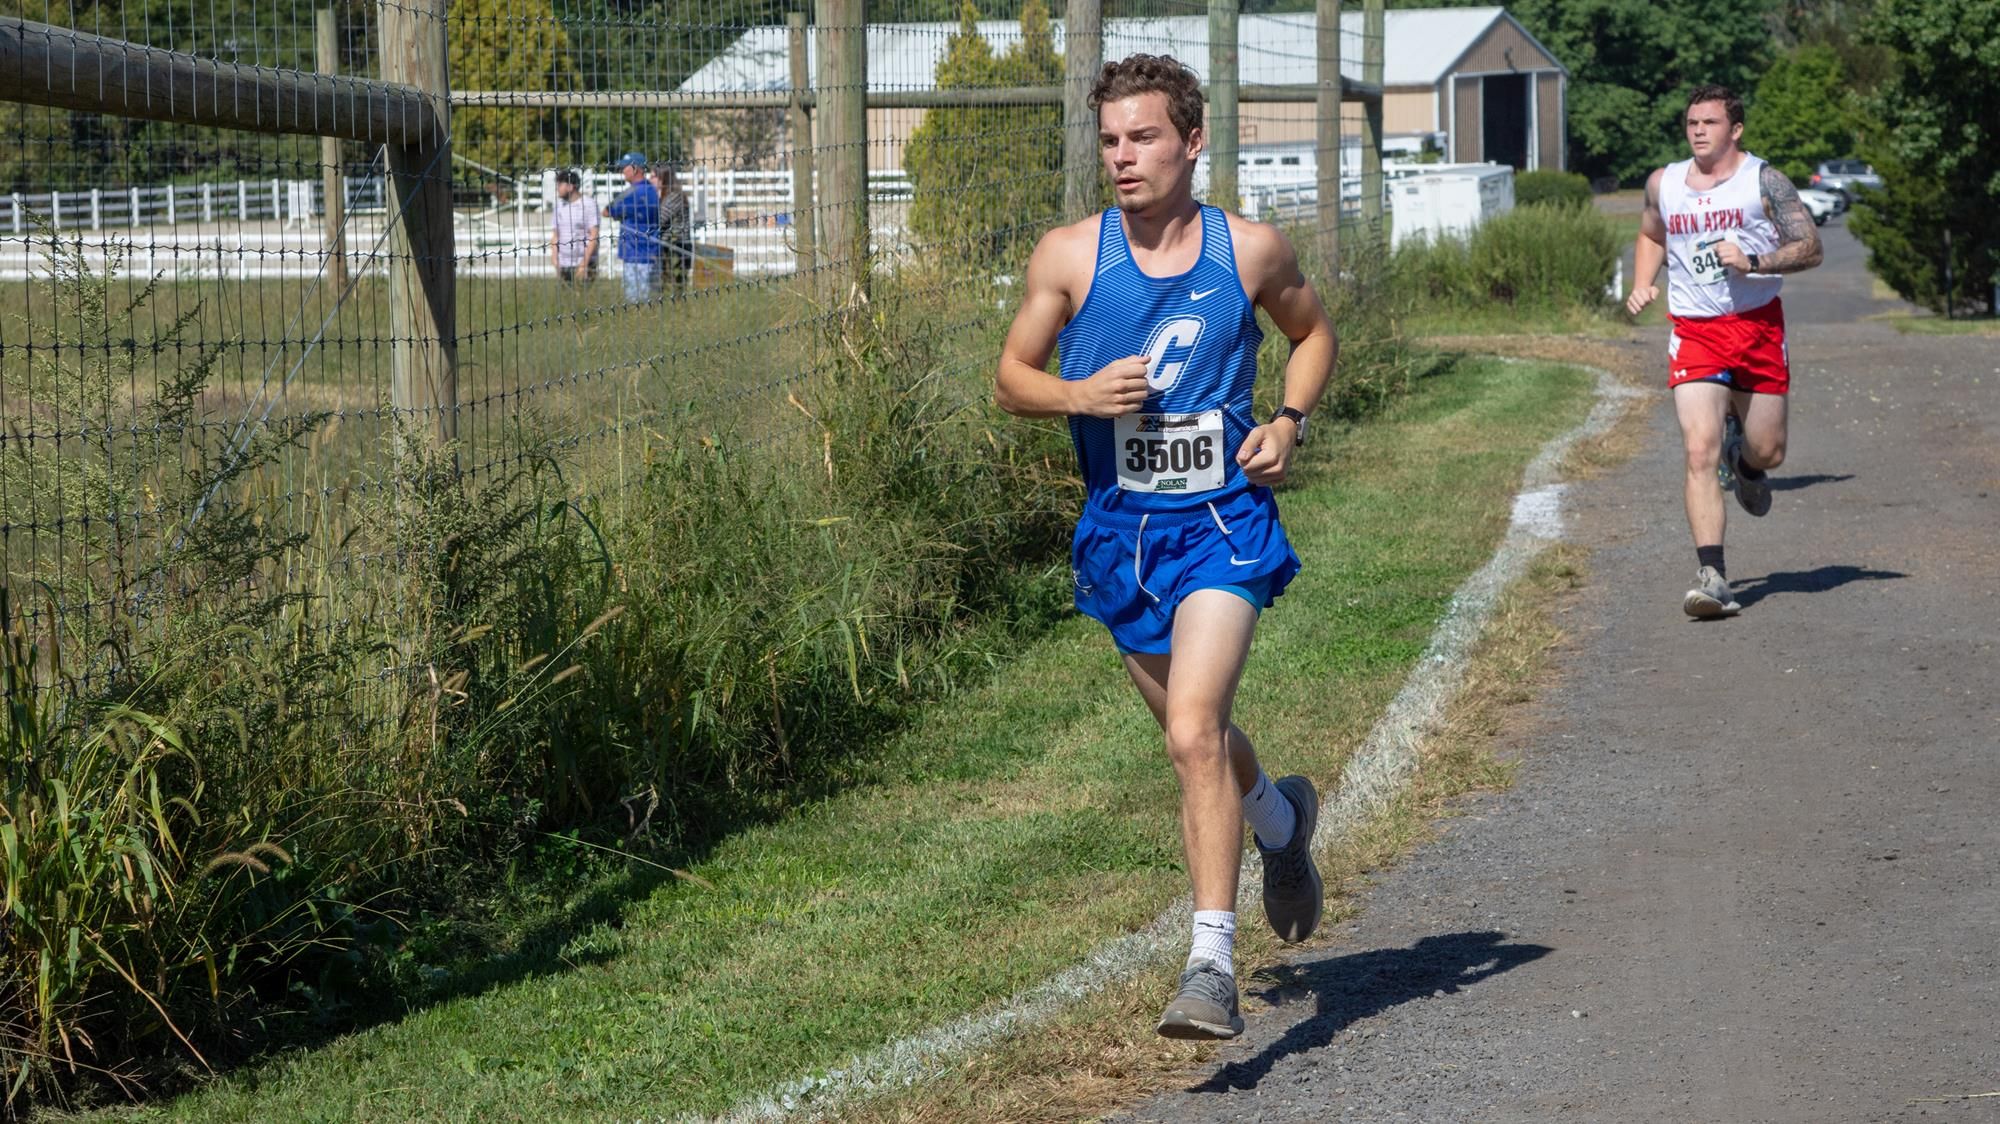 Anthony Pietrwicz running for the cross country team. Photo by Cabrini Athletics